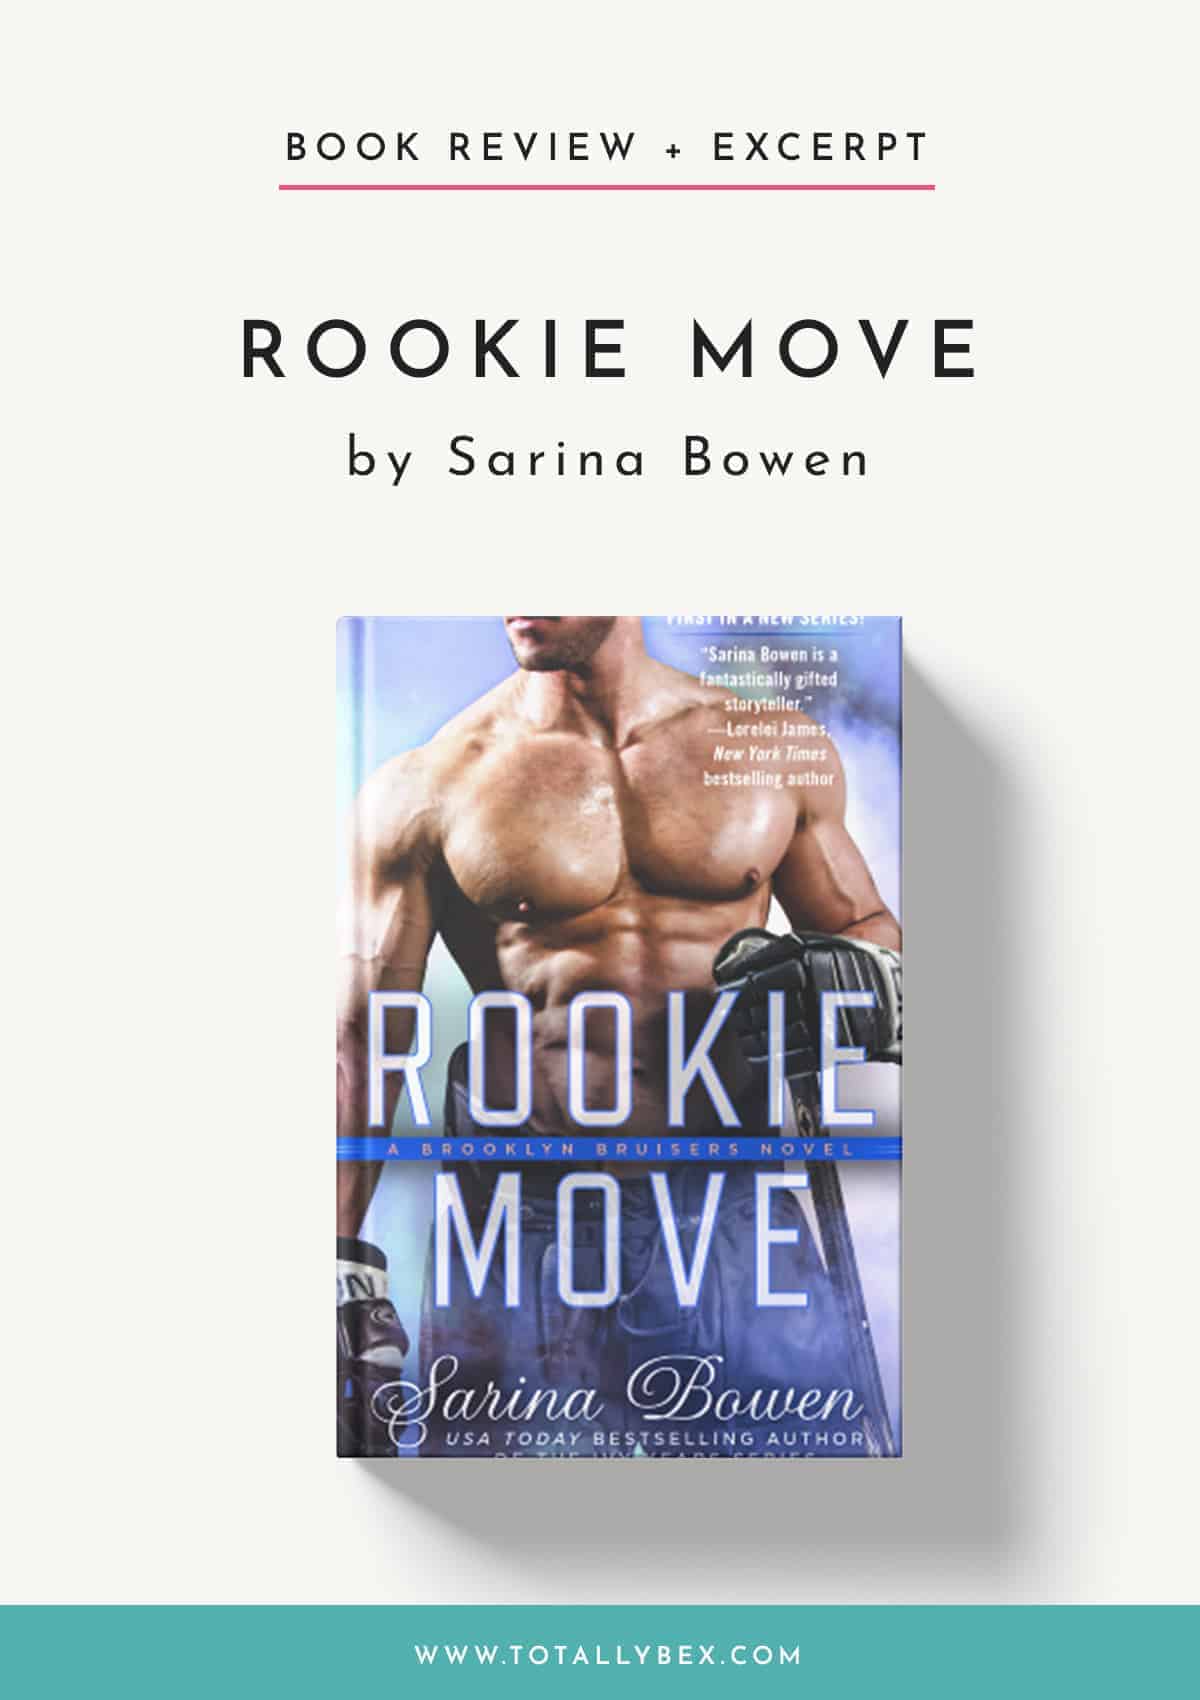 Rookie Move by Sarina Bowen-Book Review + Excerpt